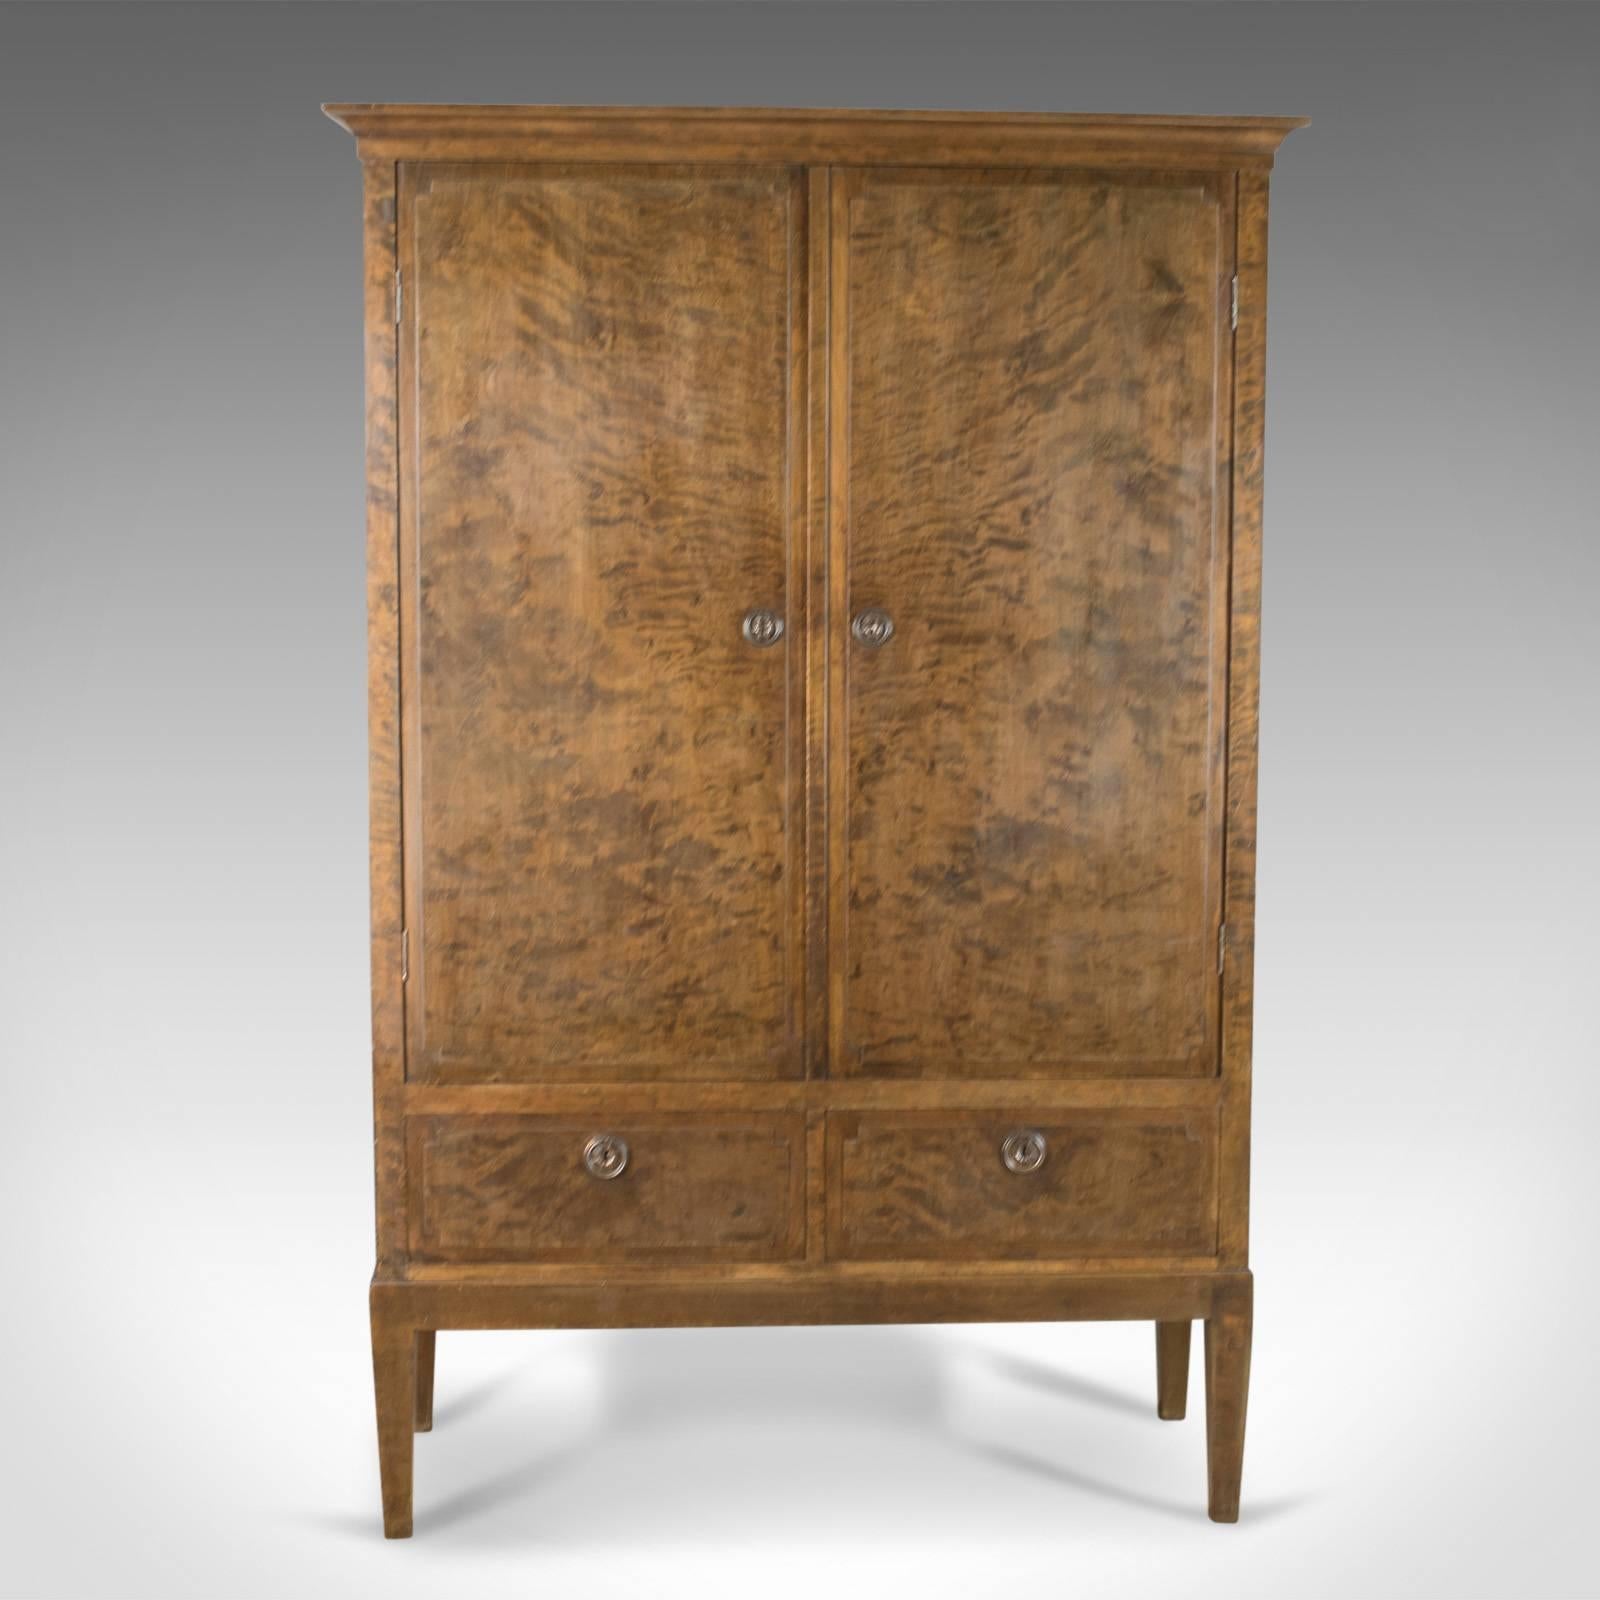 This is a vintage 1940s Swedish wardrobe by A.B. Br. Miller. An Art Deco press cupboard in walnut.

Displaying classic lines in well figured walnut
Of quality craftsmanship from renowned Swedish furnishers, A.B. Br Miller
Displaying good color